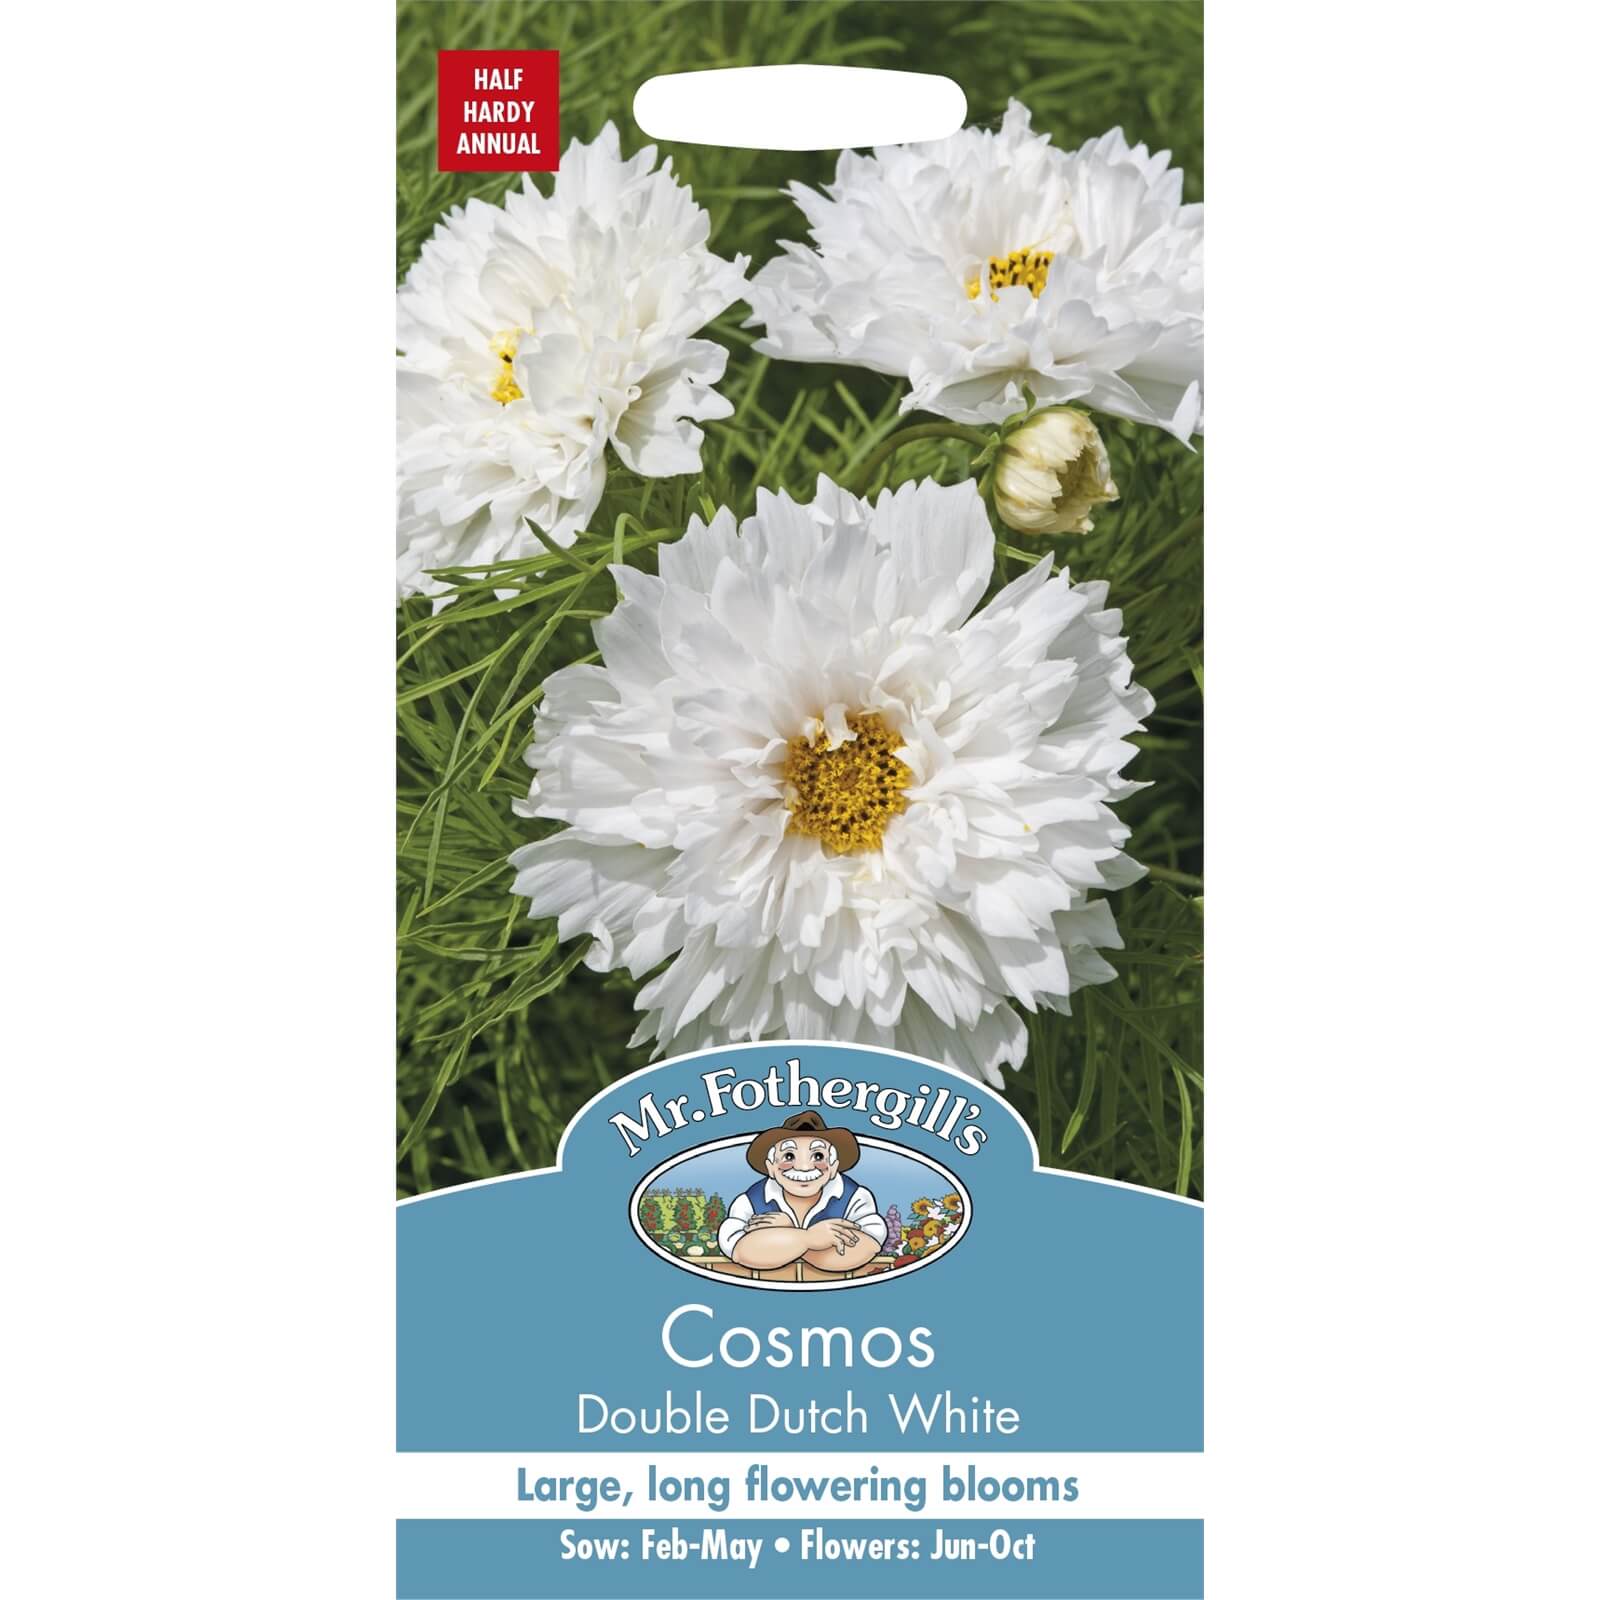 Mr. Fothergill's Cosmos Double Dutch White